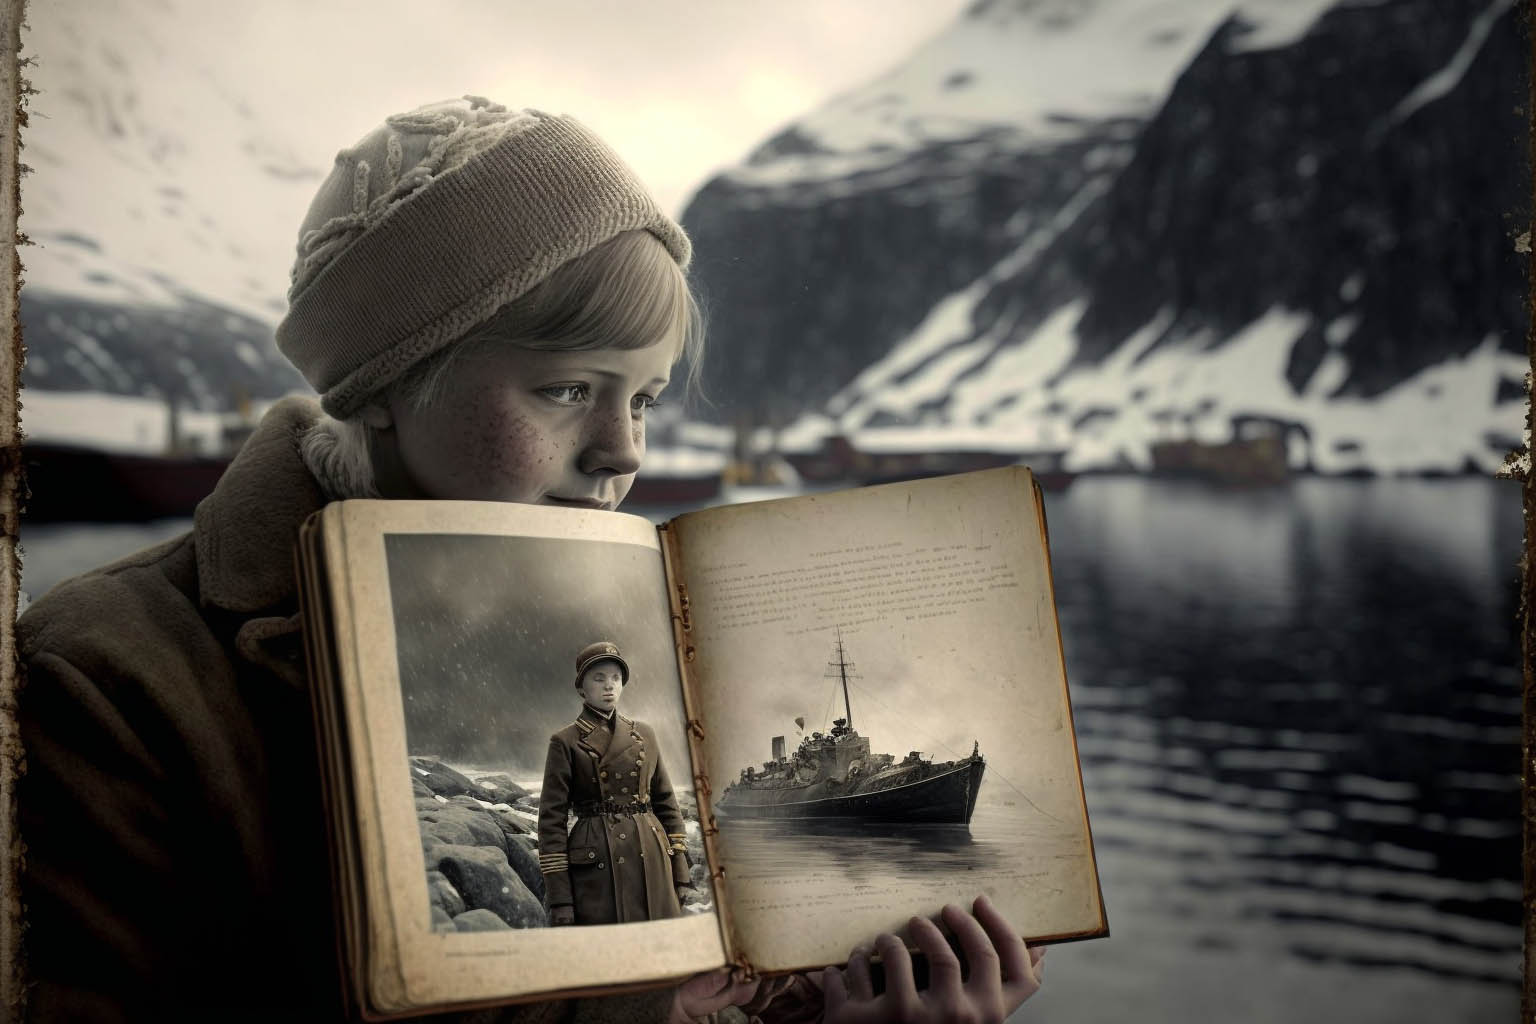 A young boy is holding a book featuring an image of a tug boat and its captain.